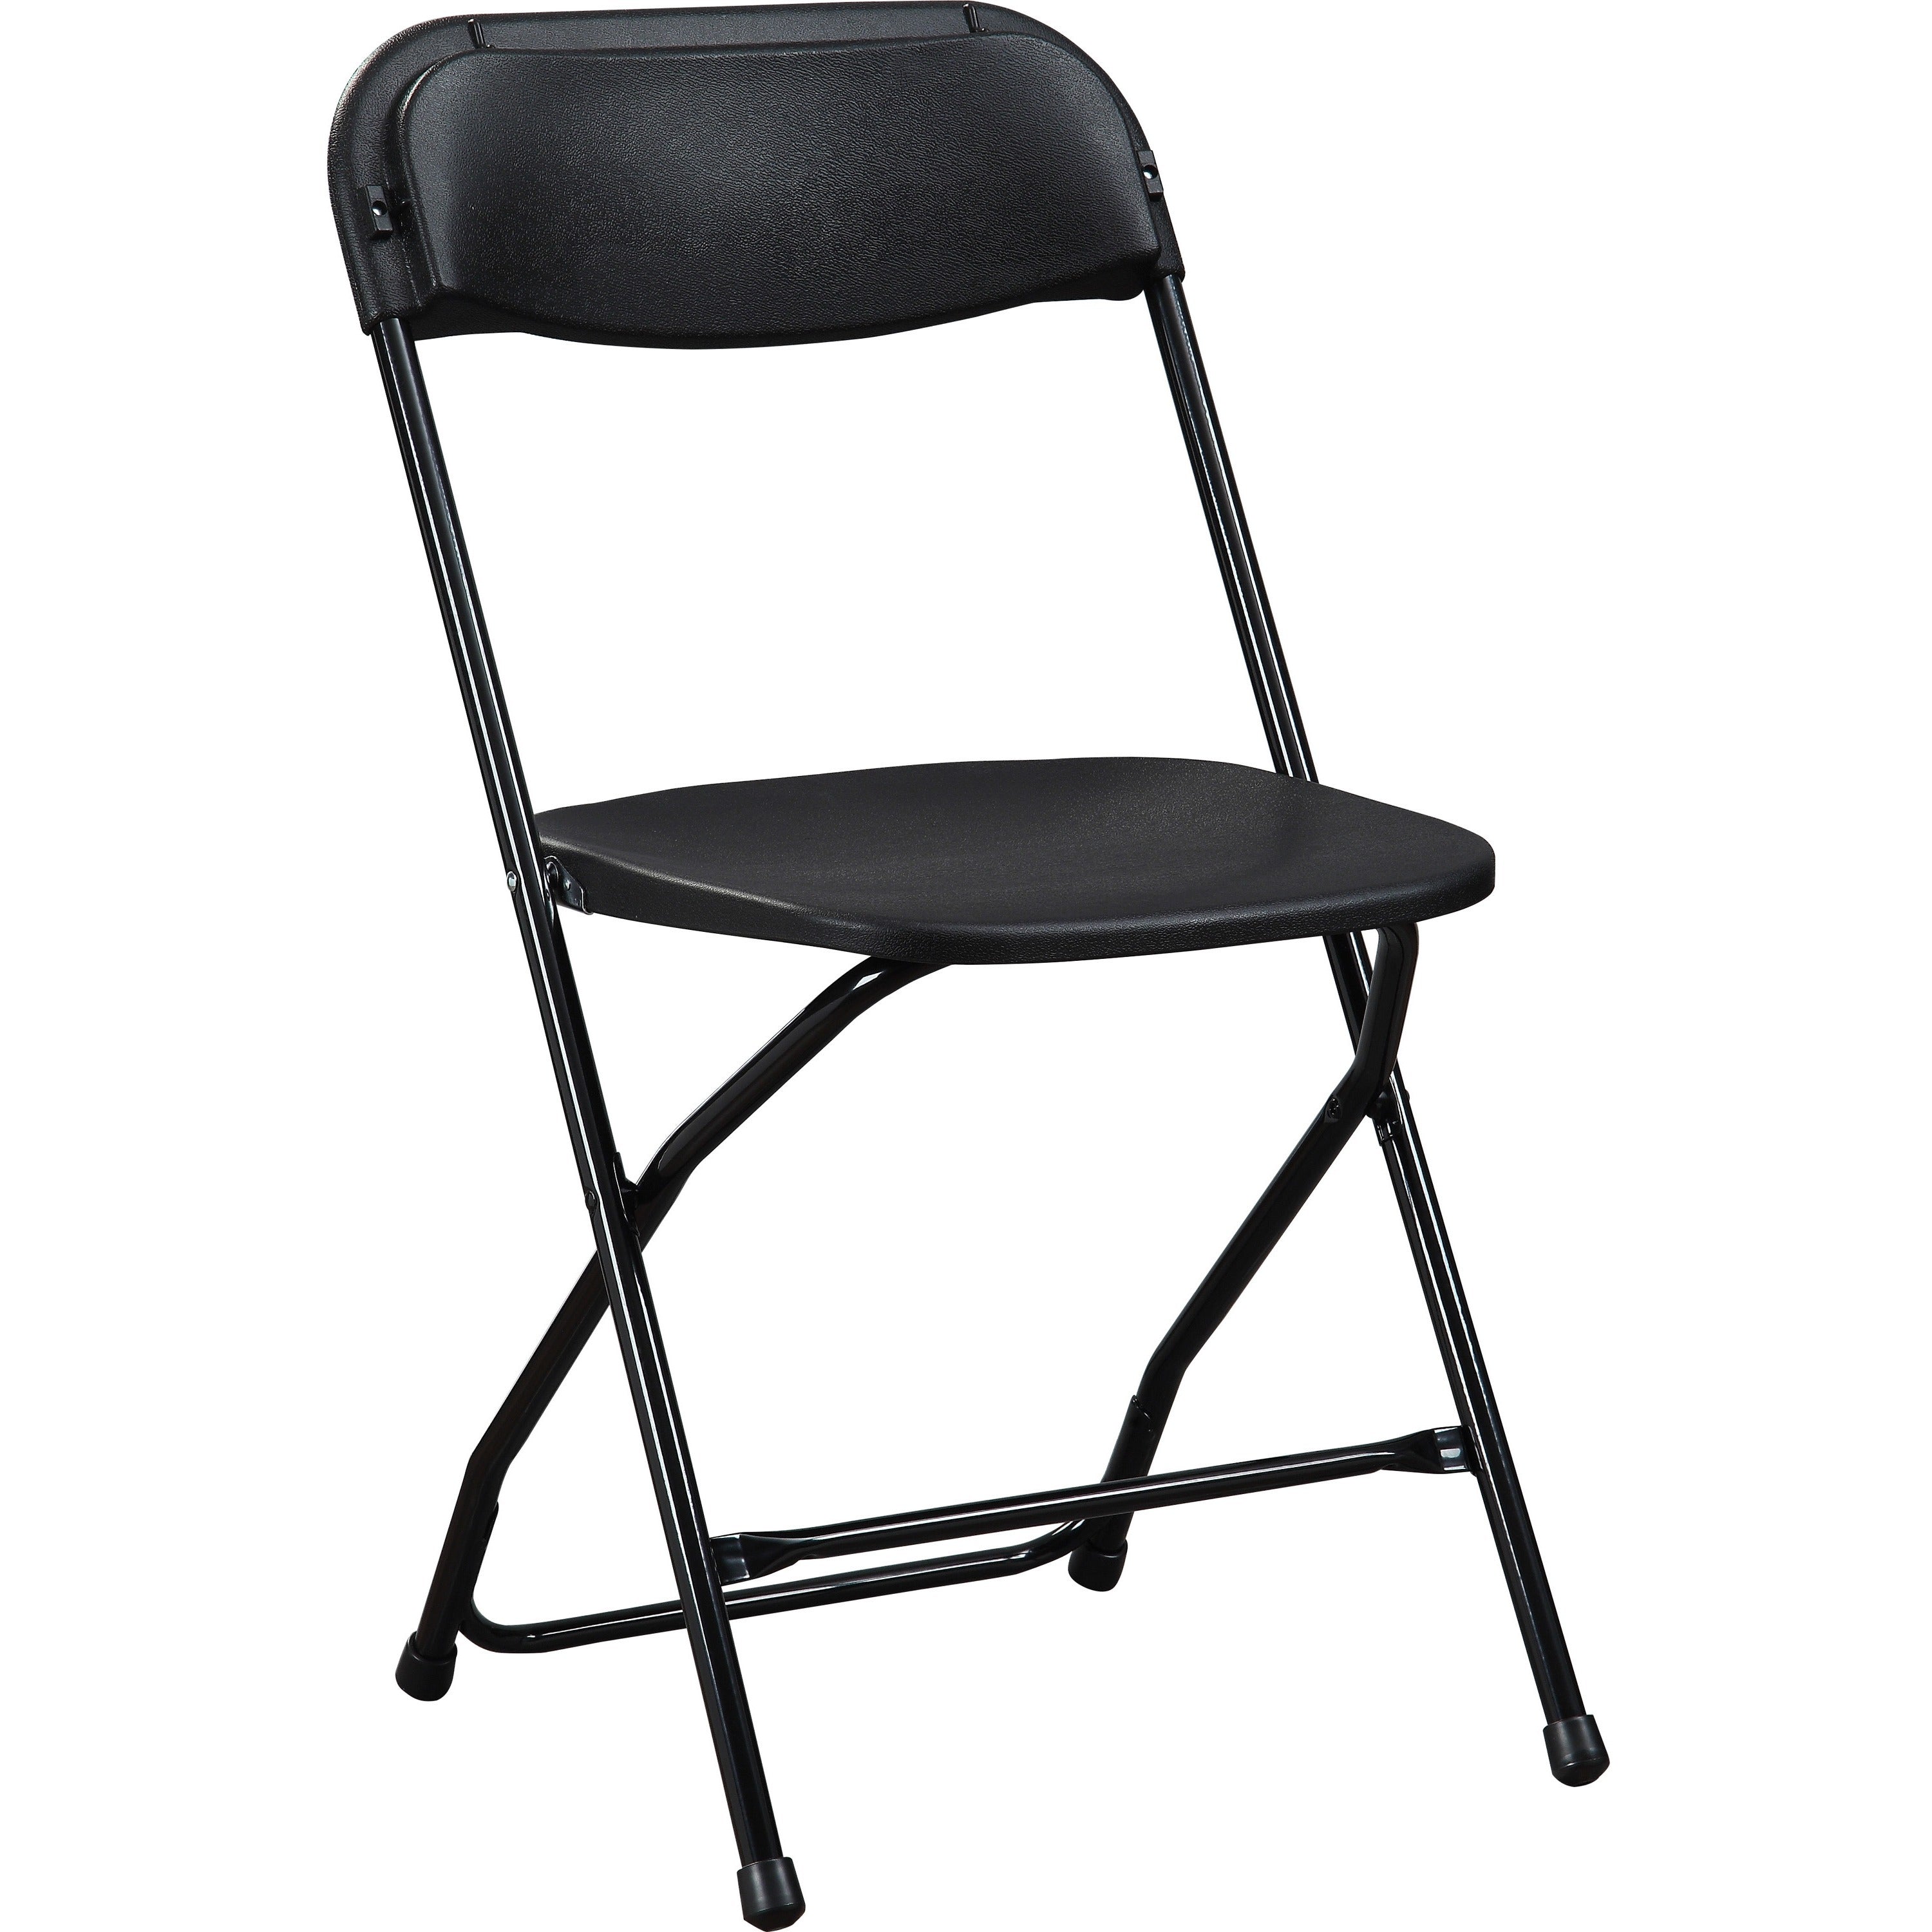 lorell-injection-molded-folding-chairs-x-style-base-black-plastic-4-carton_llr62534 - 1